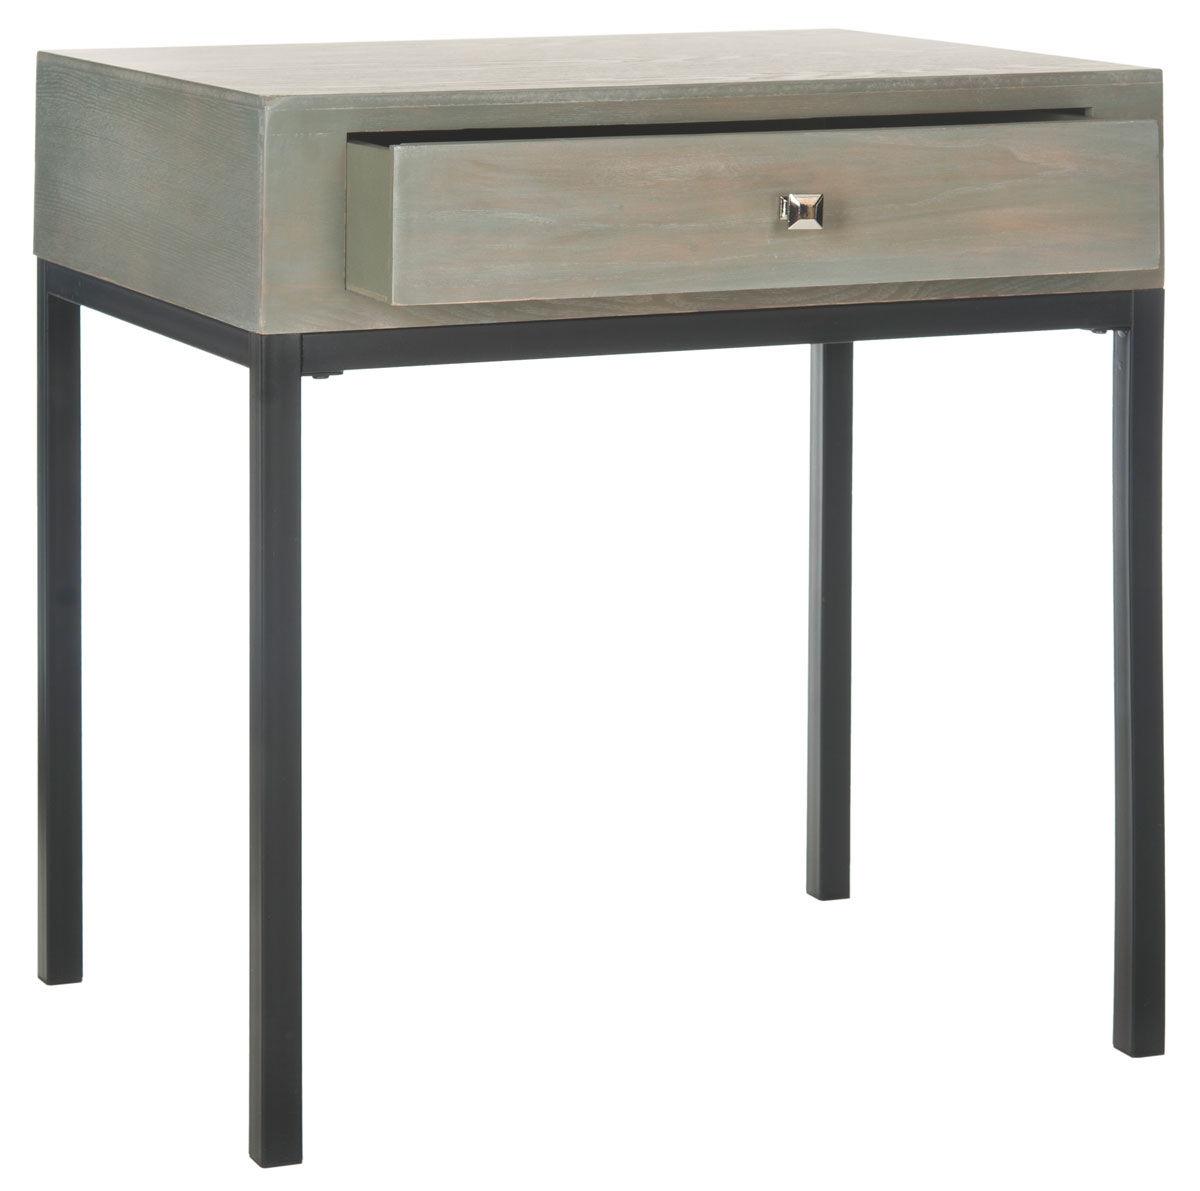 Adena End Table With Storage Drawer - French Grey - Arlo Home - Image 1